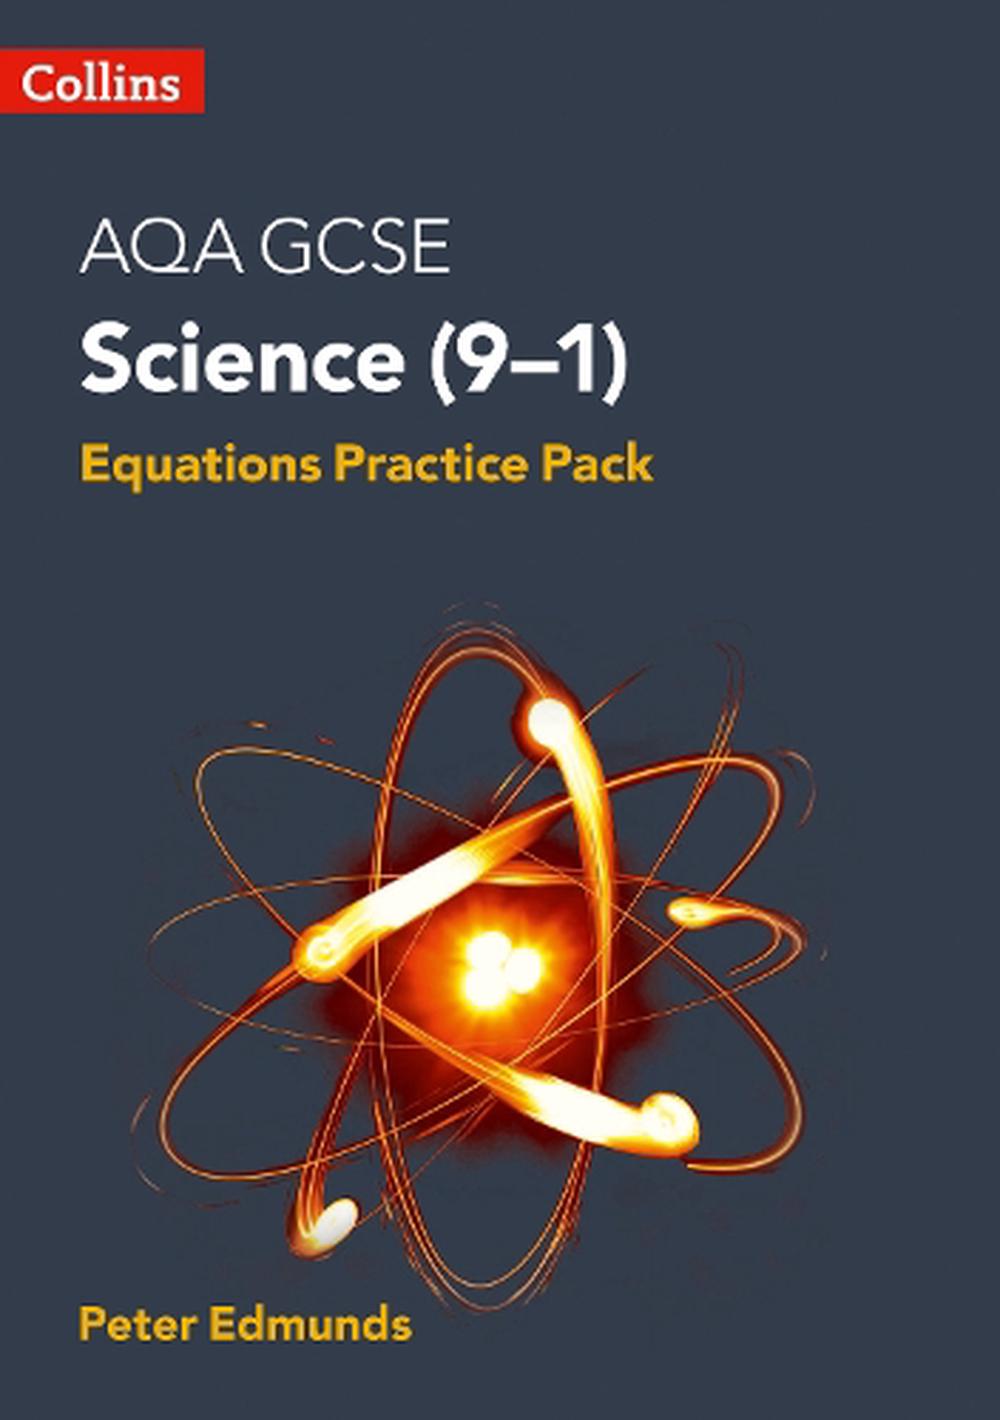 aqa-gcse-science-9-1-equations-practice-pack-by-peter-edmunds-paperback-9780008458515-buy